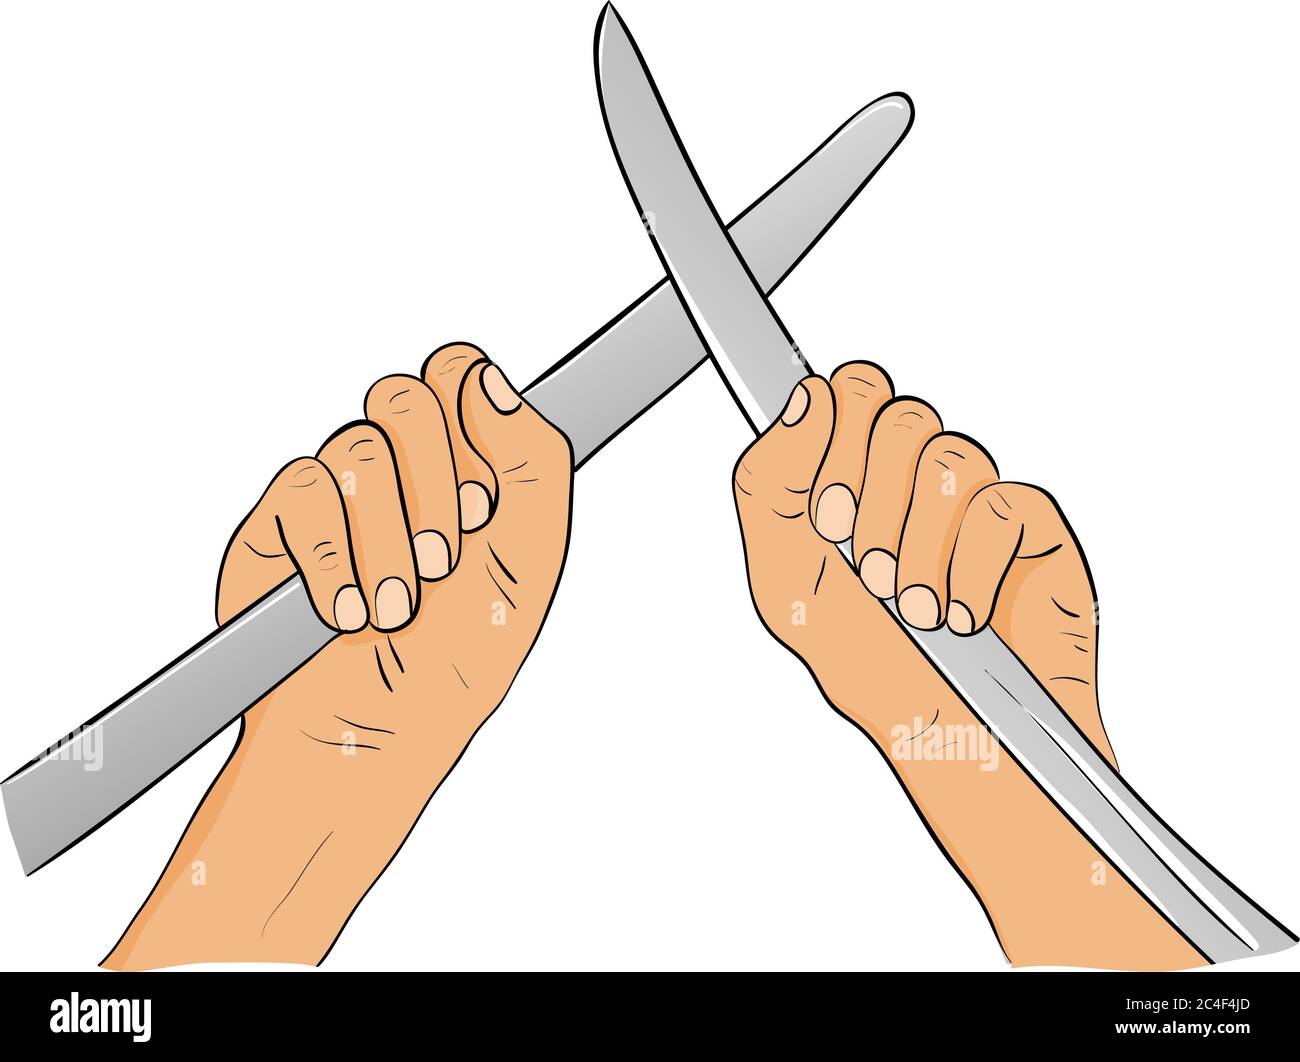 Hands breaking up a fight by taking apart sword blades. Cartoon vector illustration. Hands holding crossed swords. Stock Vector